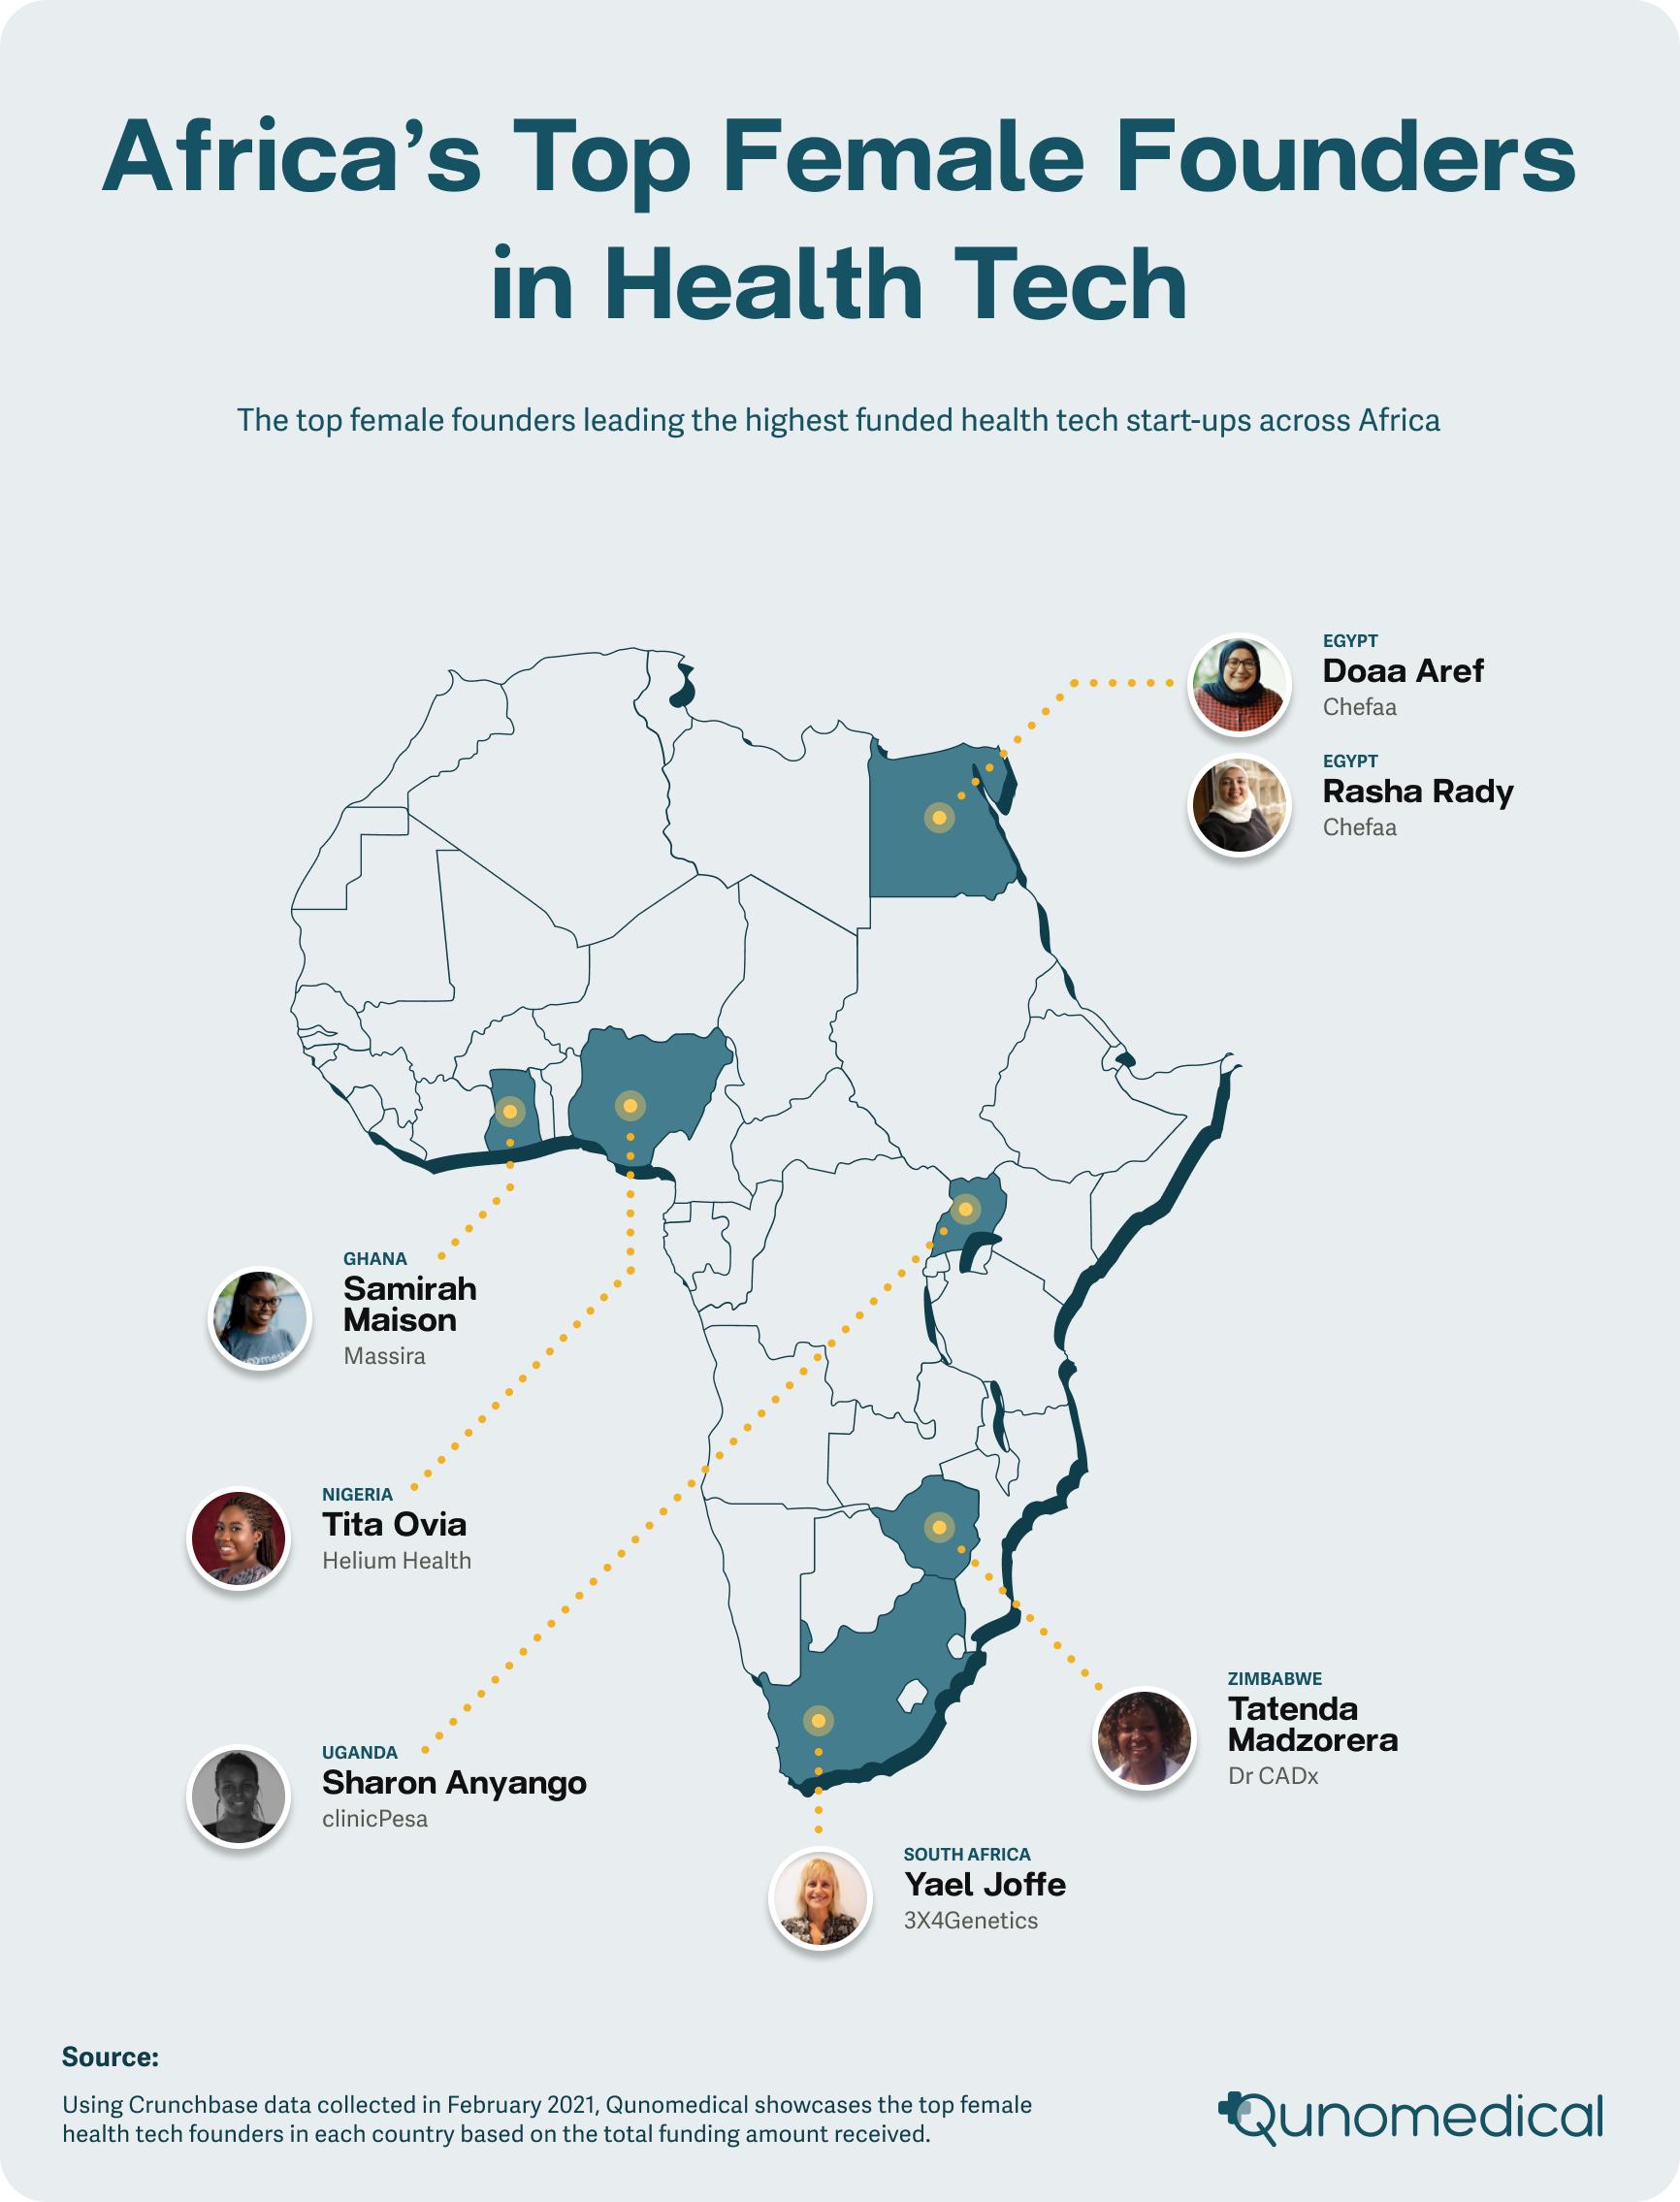 With a total of 23 health tech start-ups with at least one female founder, figures across the continent are steadily rising. Nigeria and South Africa both hold the top spot for hosting the majority of the start-ups.